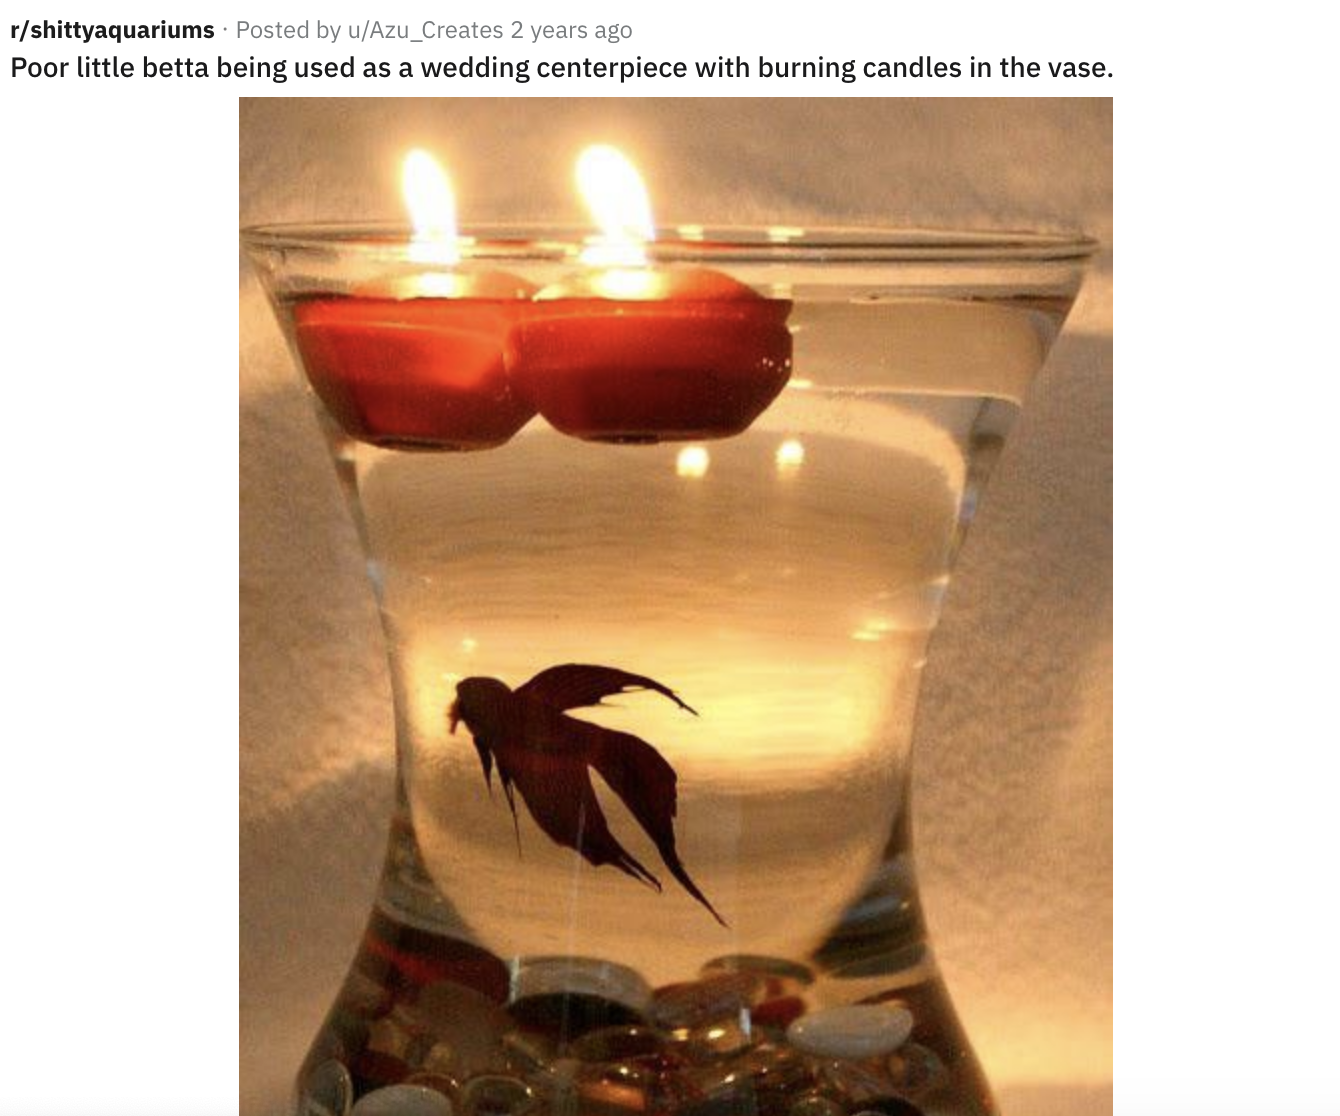 A beta fish is being held in a vase, with lit candles floating in the water above it